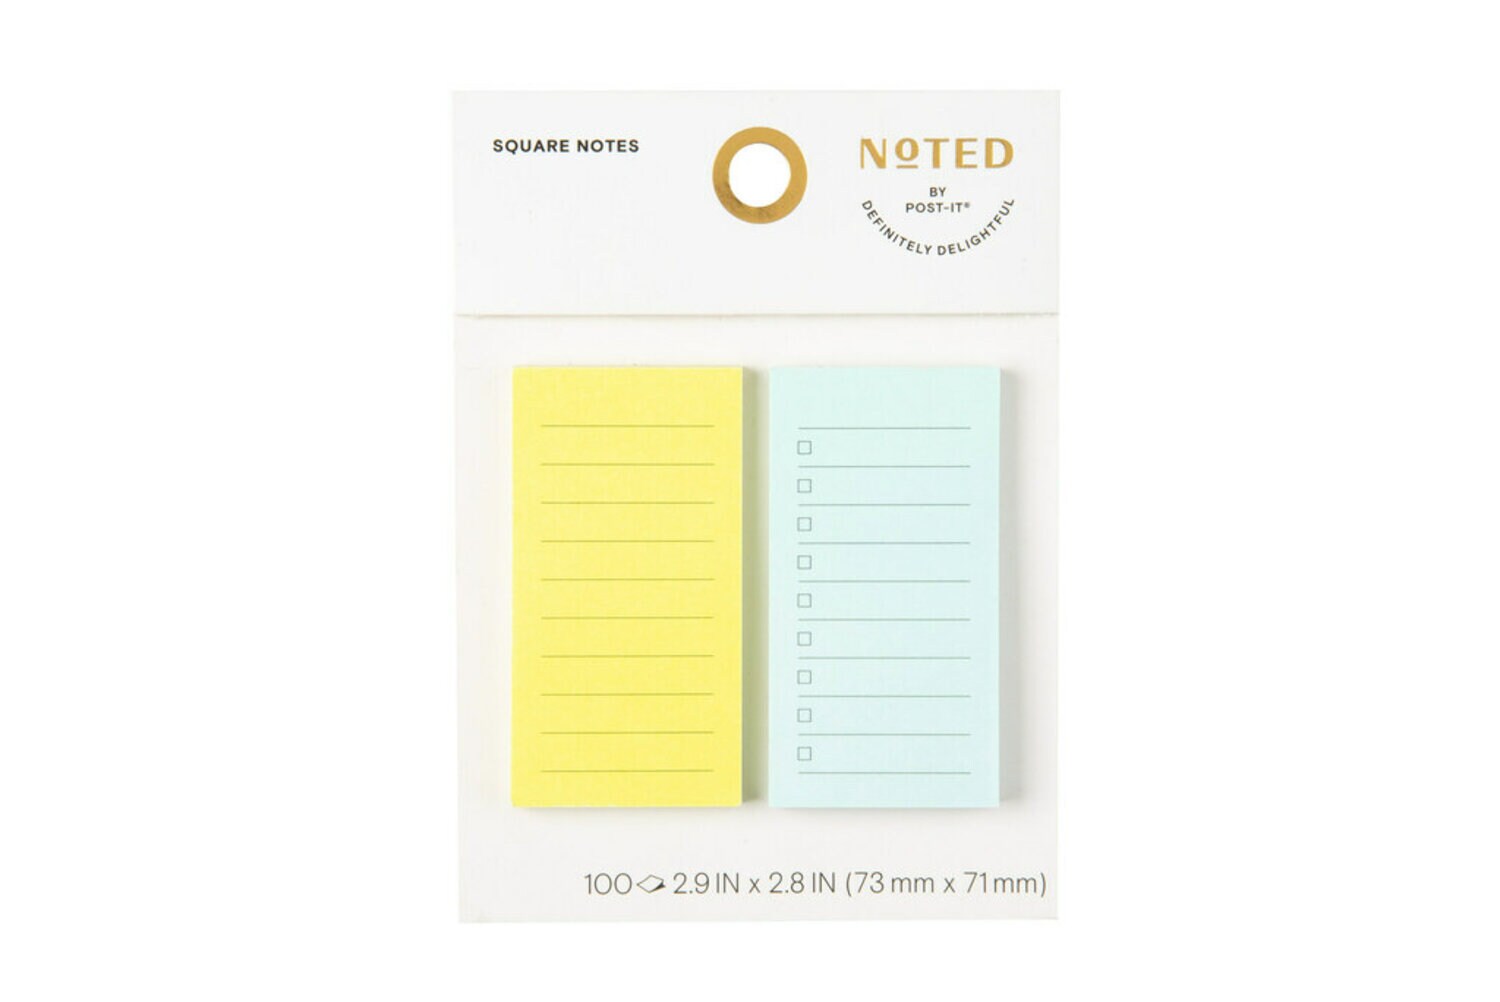 7100264574 - Post-it Printed Notes NTD5-DUO-CL, 1.4 in x 2.8 in (35 mm x 71.1 mm)